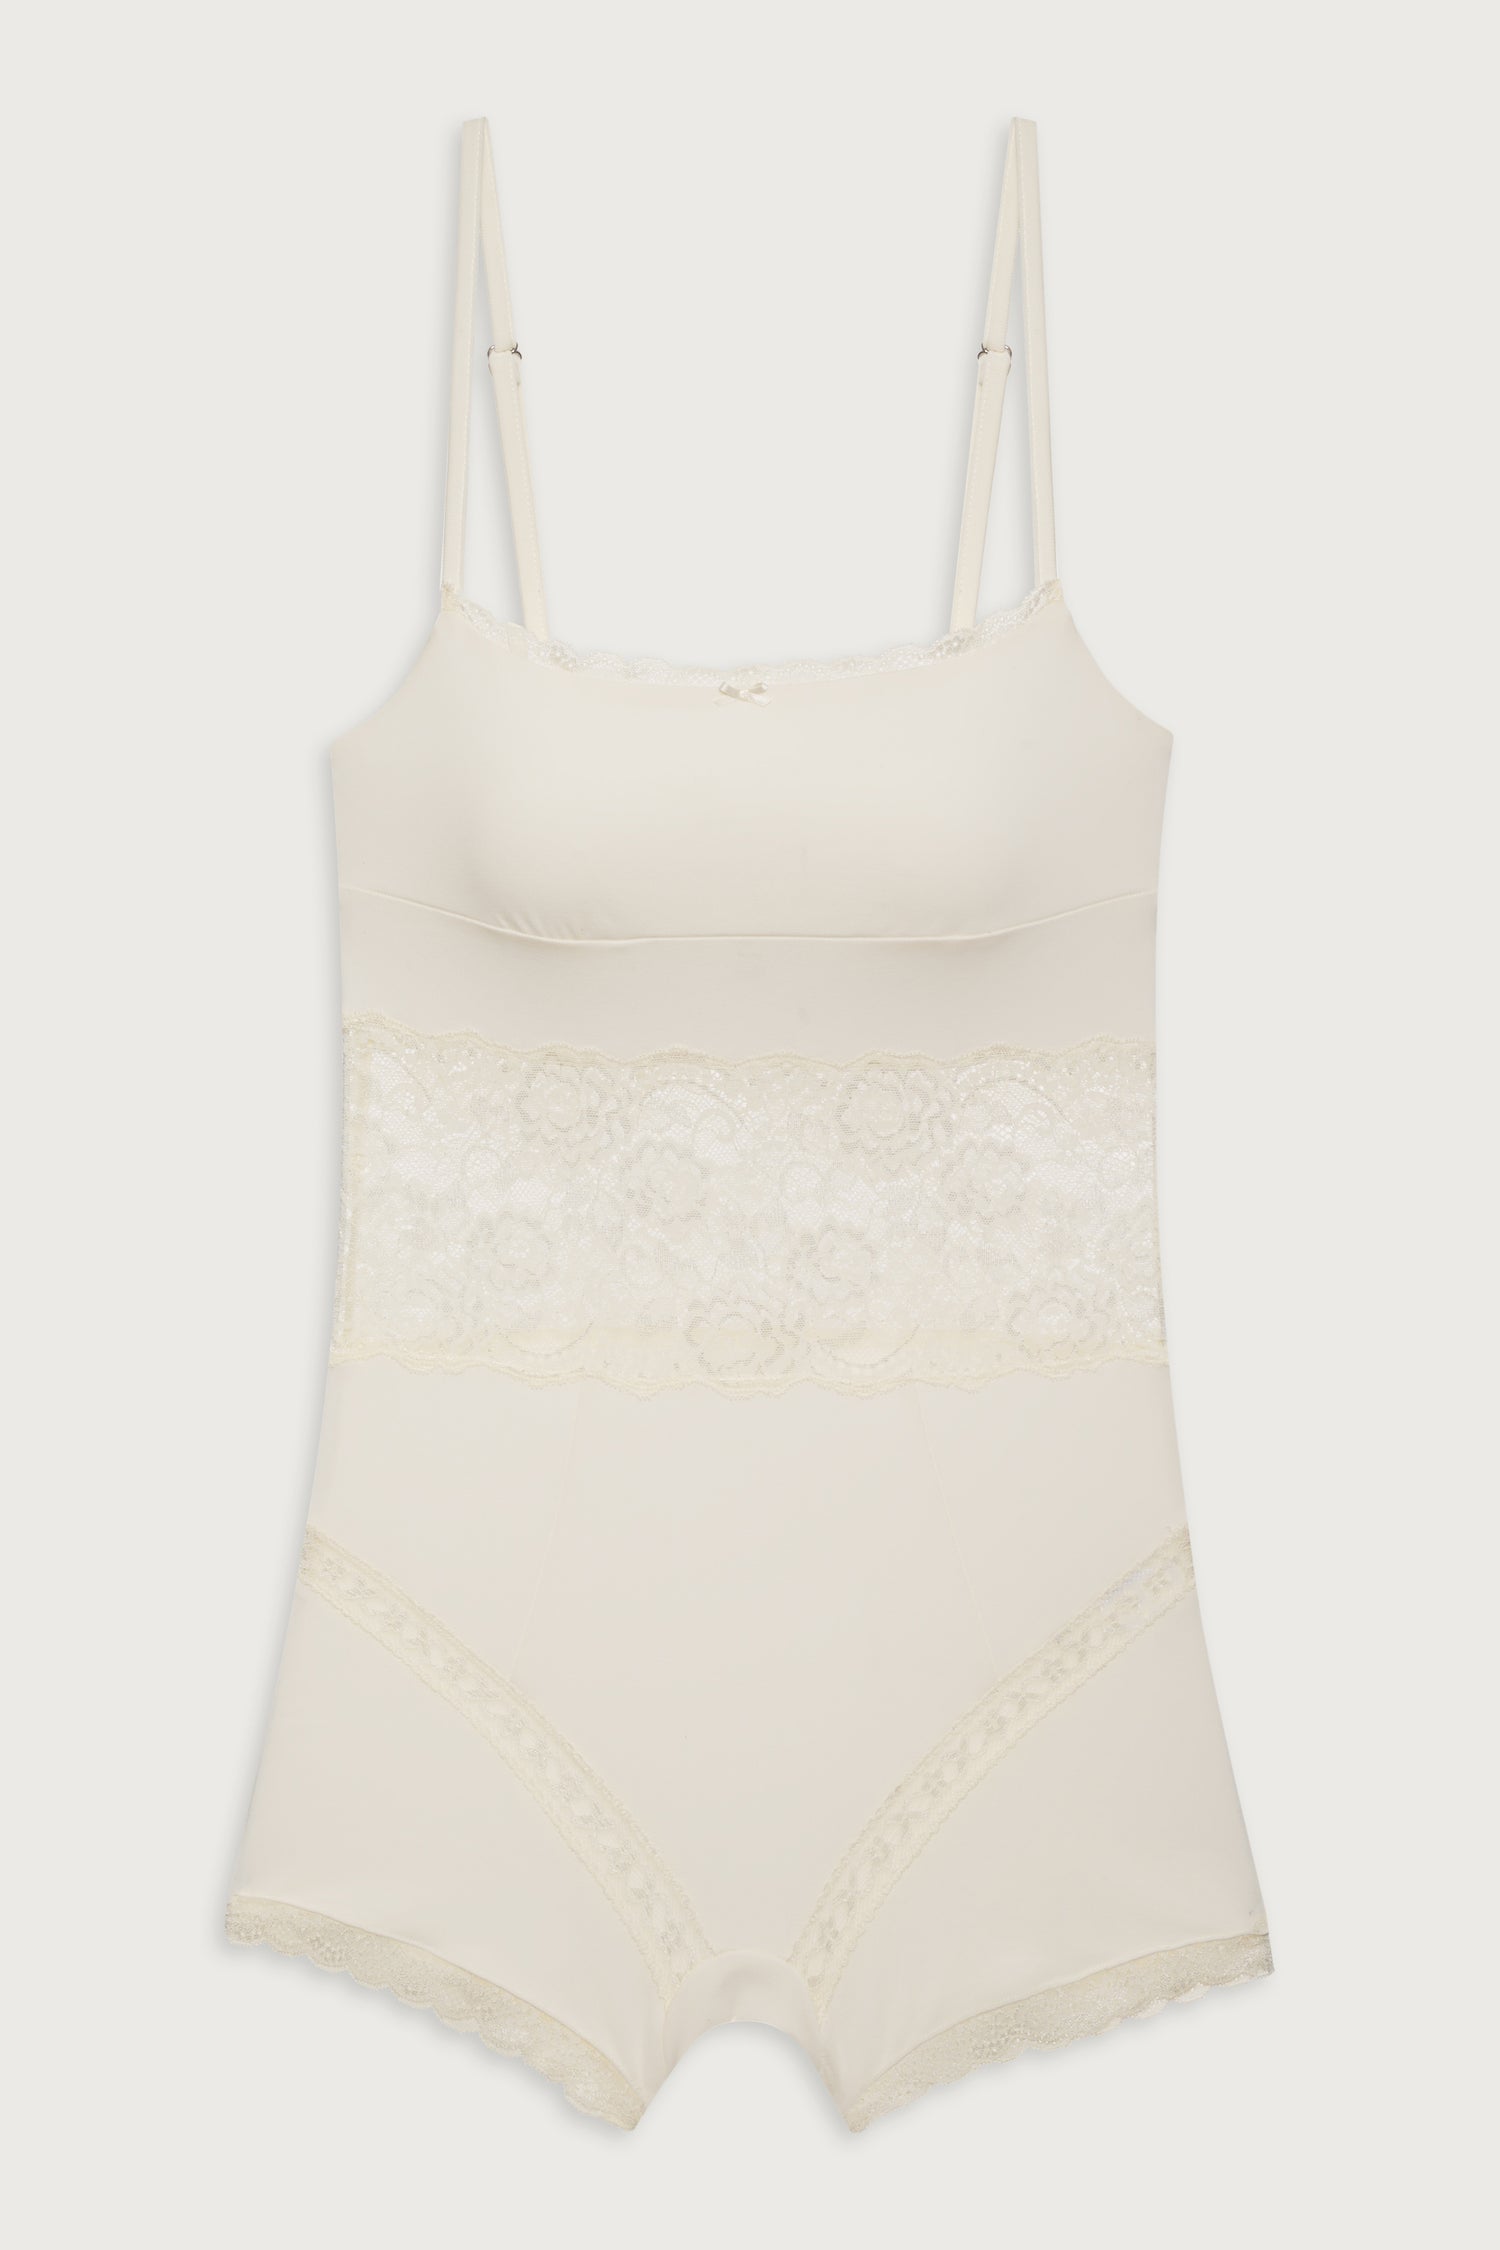 Buy Nelly Delicate Lace Bodysuit - White